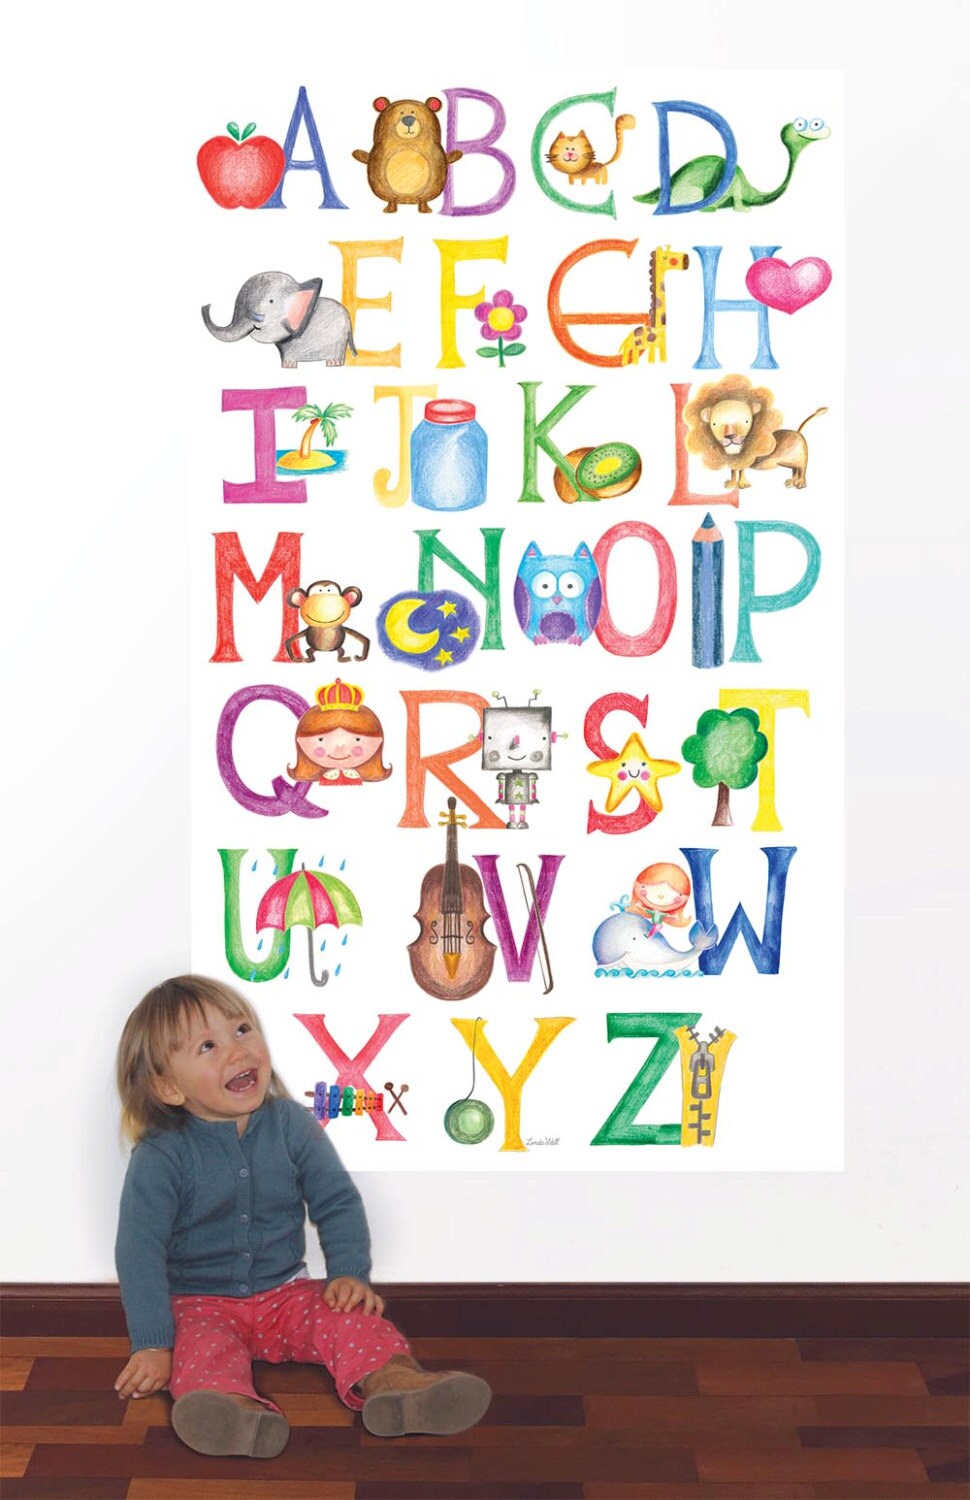 Abc Alphabet Picture Icons Silhouettes Wall Decal Home Decoration For Kids  Room Study Language Removable Vinyl Murals Yt1148 - Wall Stickers -  AliExpress